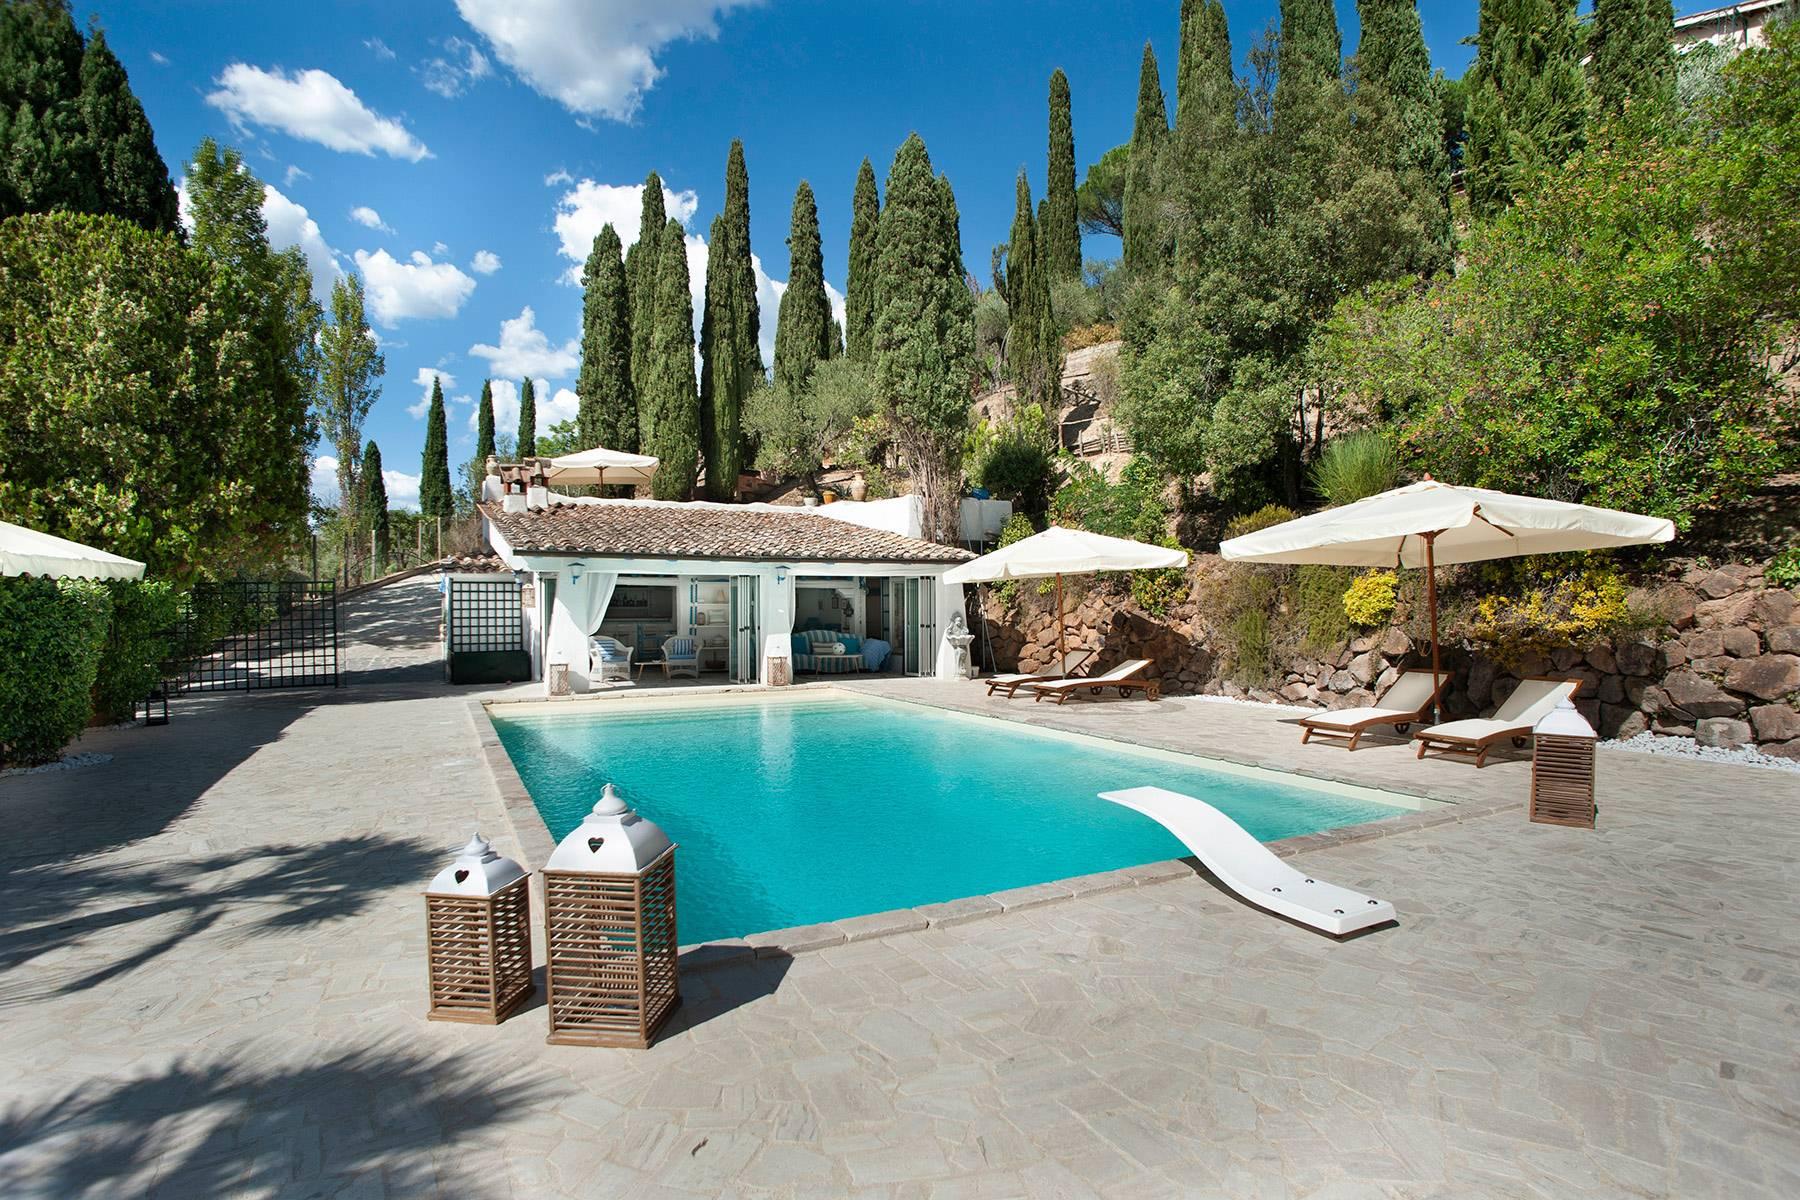 Villa Nayara - Lovely mansion with swimming pool 30 minutes from Rome - 5